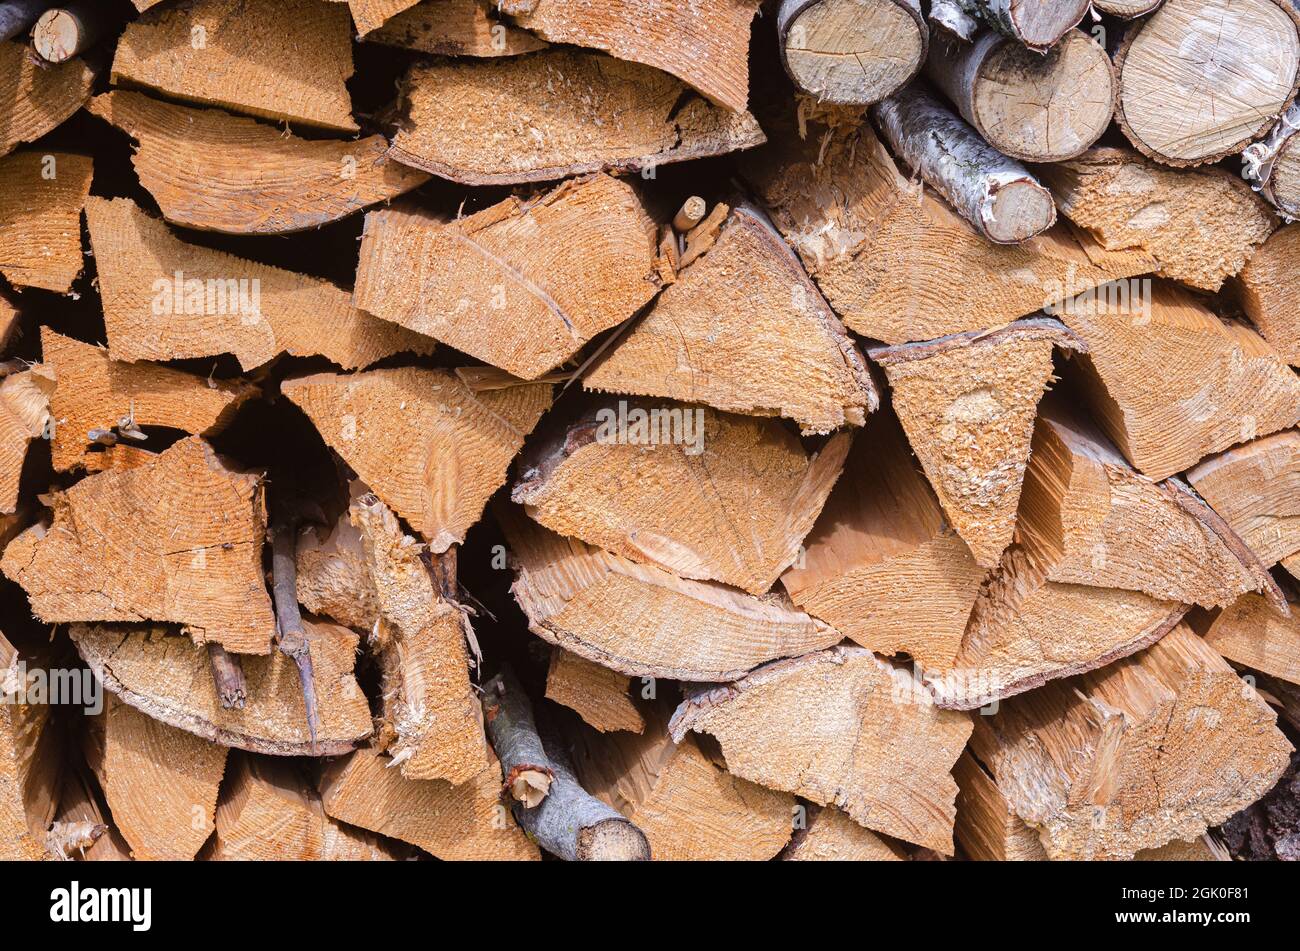 Harvesting for the winter a mixture of firewood from different species of trees, neatly stacked. Firewood for space heating and cooking. Stock Photo